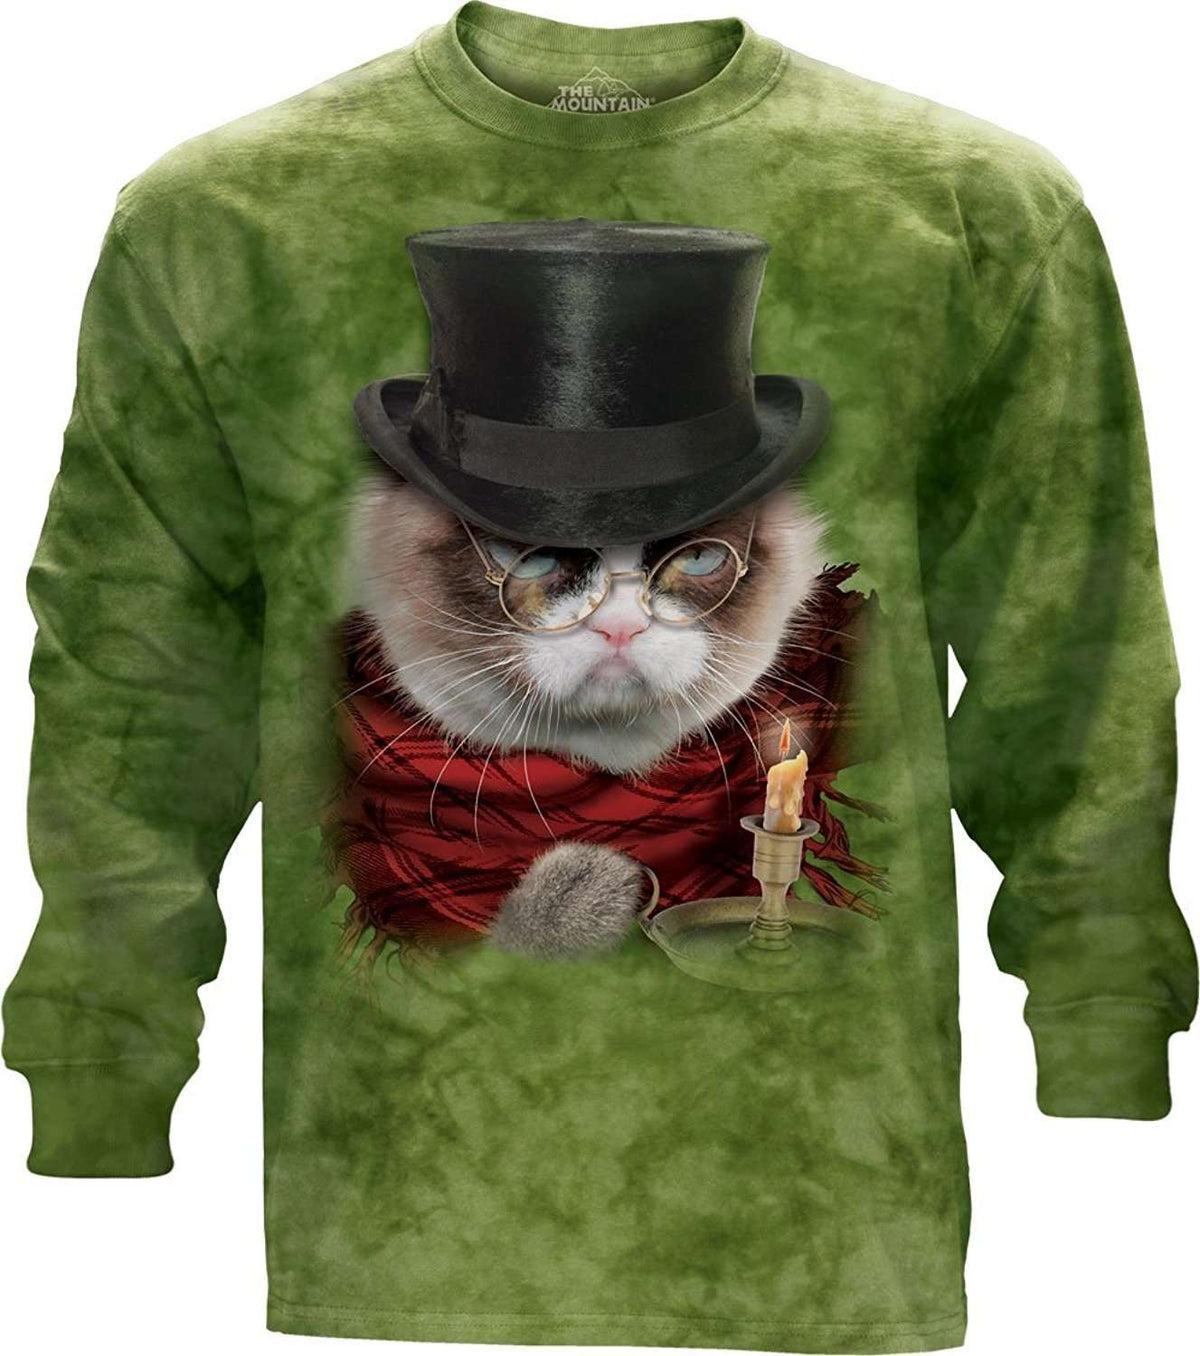 Designs by MyUtopia Shout Out:Grumpy Cat Does Christmas as Grumpenezer Scrooge Tee Shirt by the Mountain,Long Sleeve / Holiday Green / Small,Adult Unisex T-Shirt